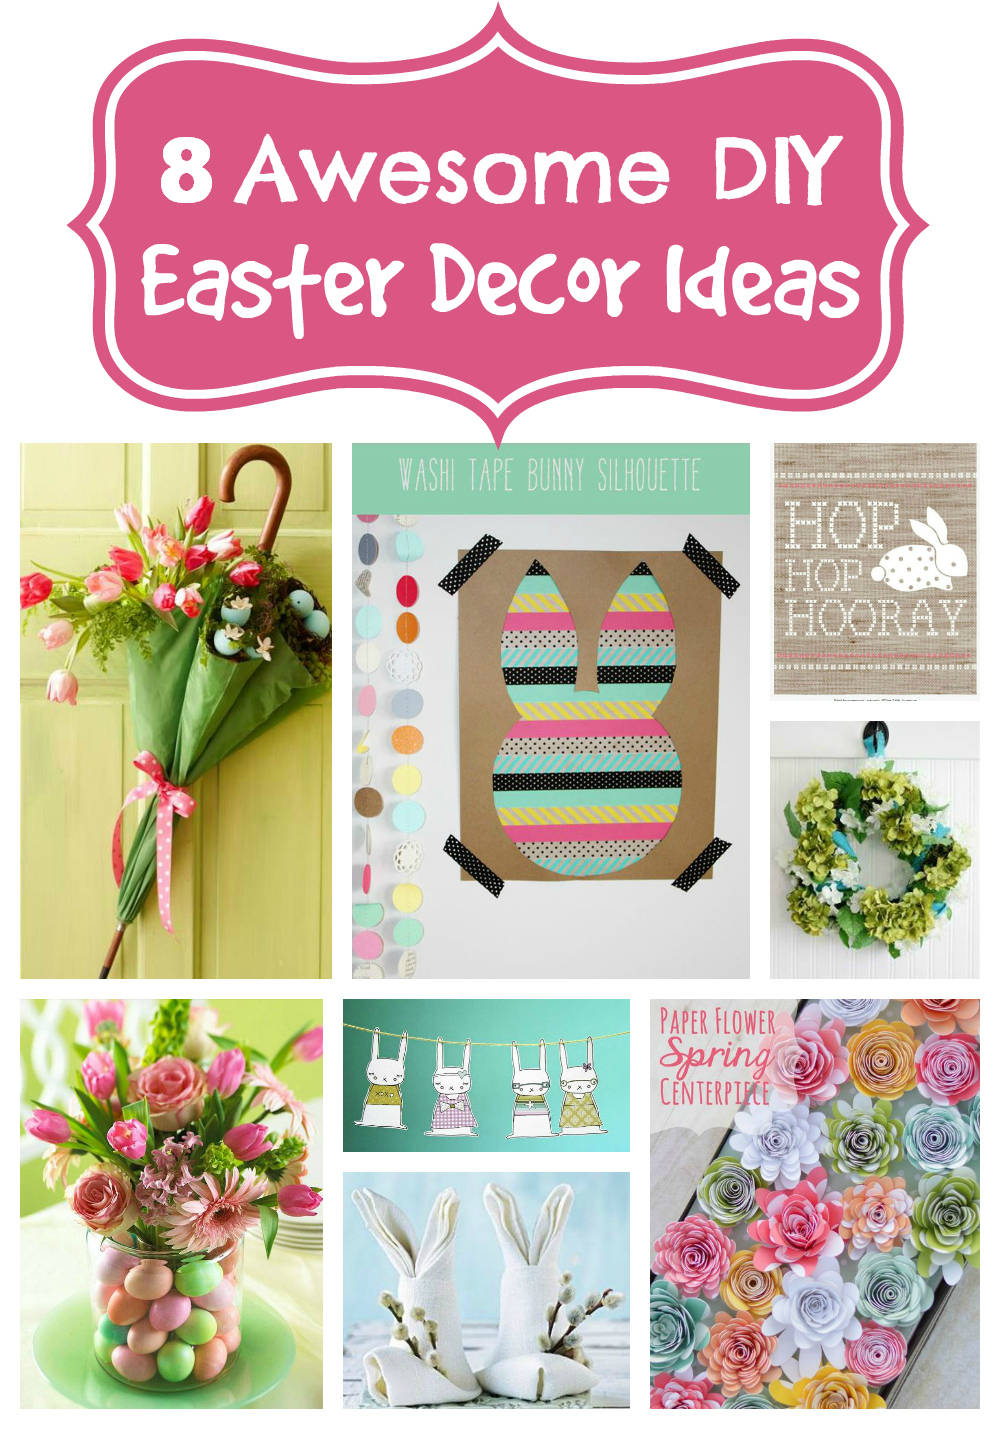 8 Awesome DIY Easter Decor Ideas | The Mindful Lifestyle at The Mindful Shopper